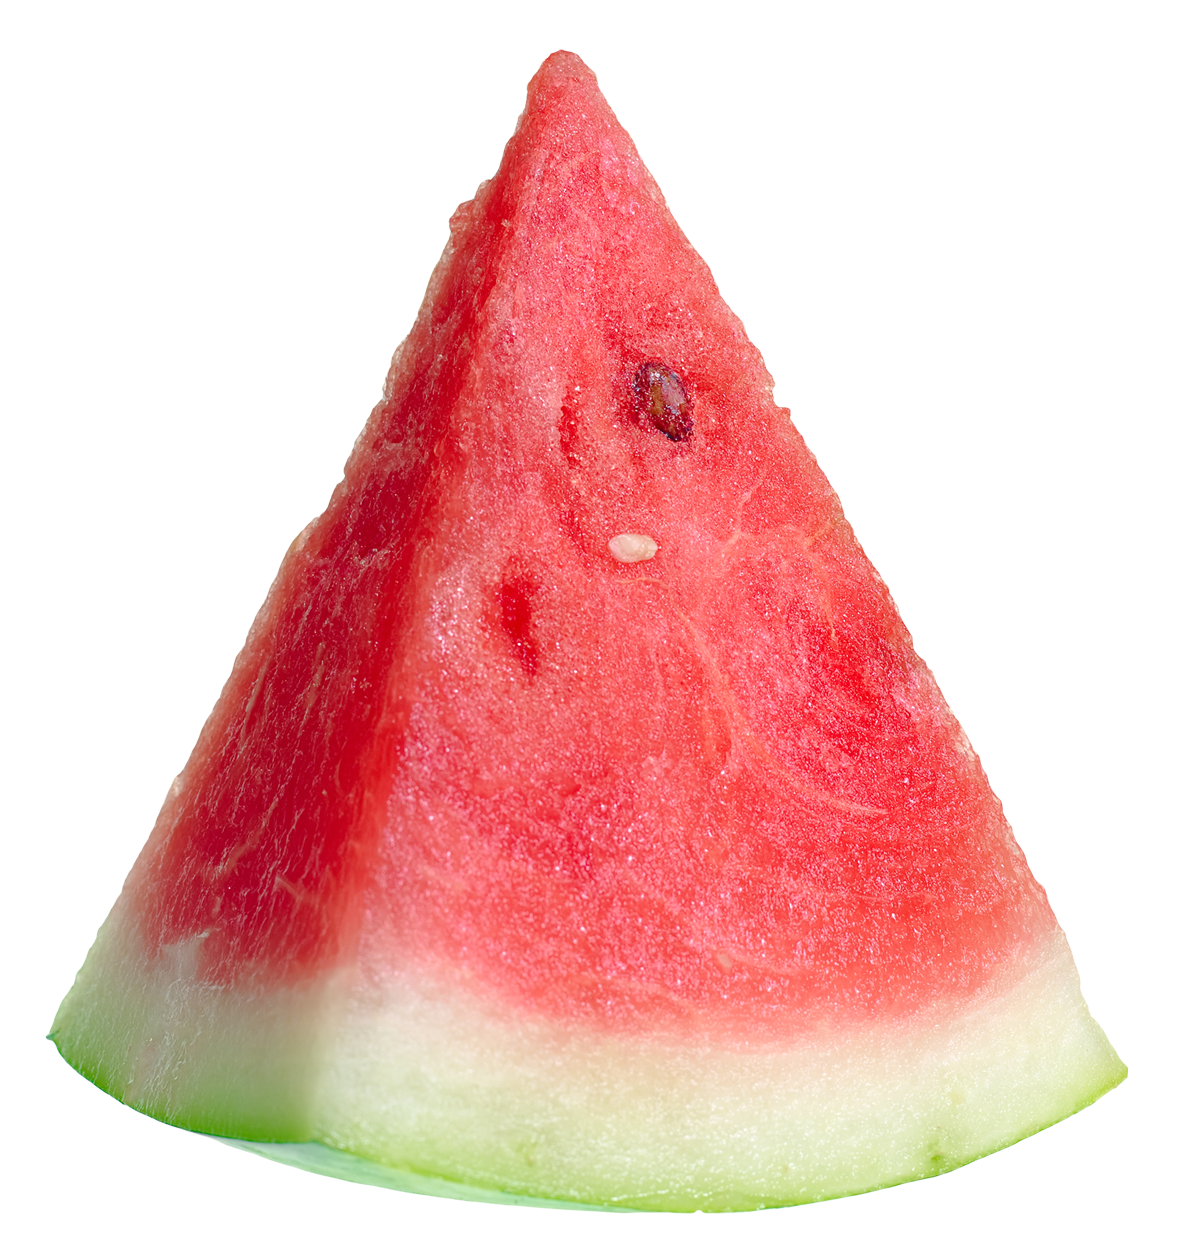 Red Seeds Watermelon PNG